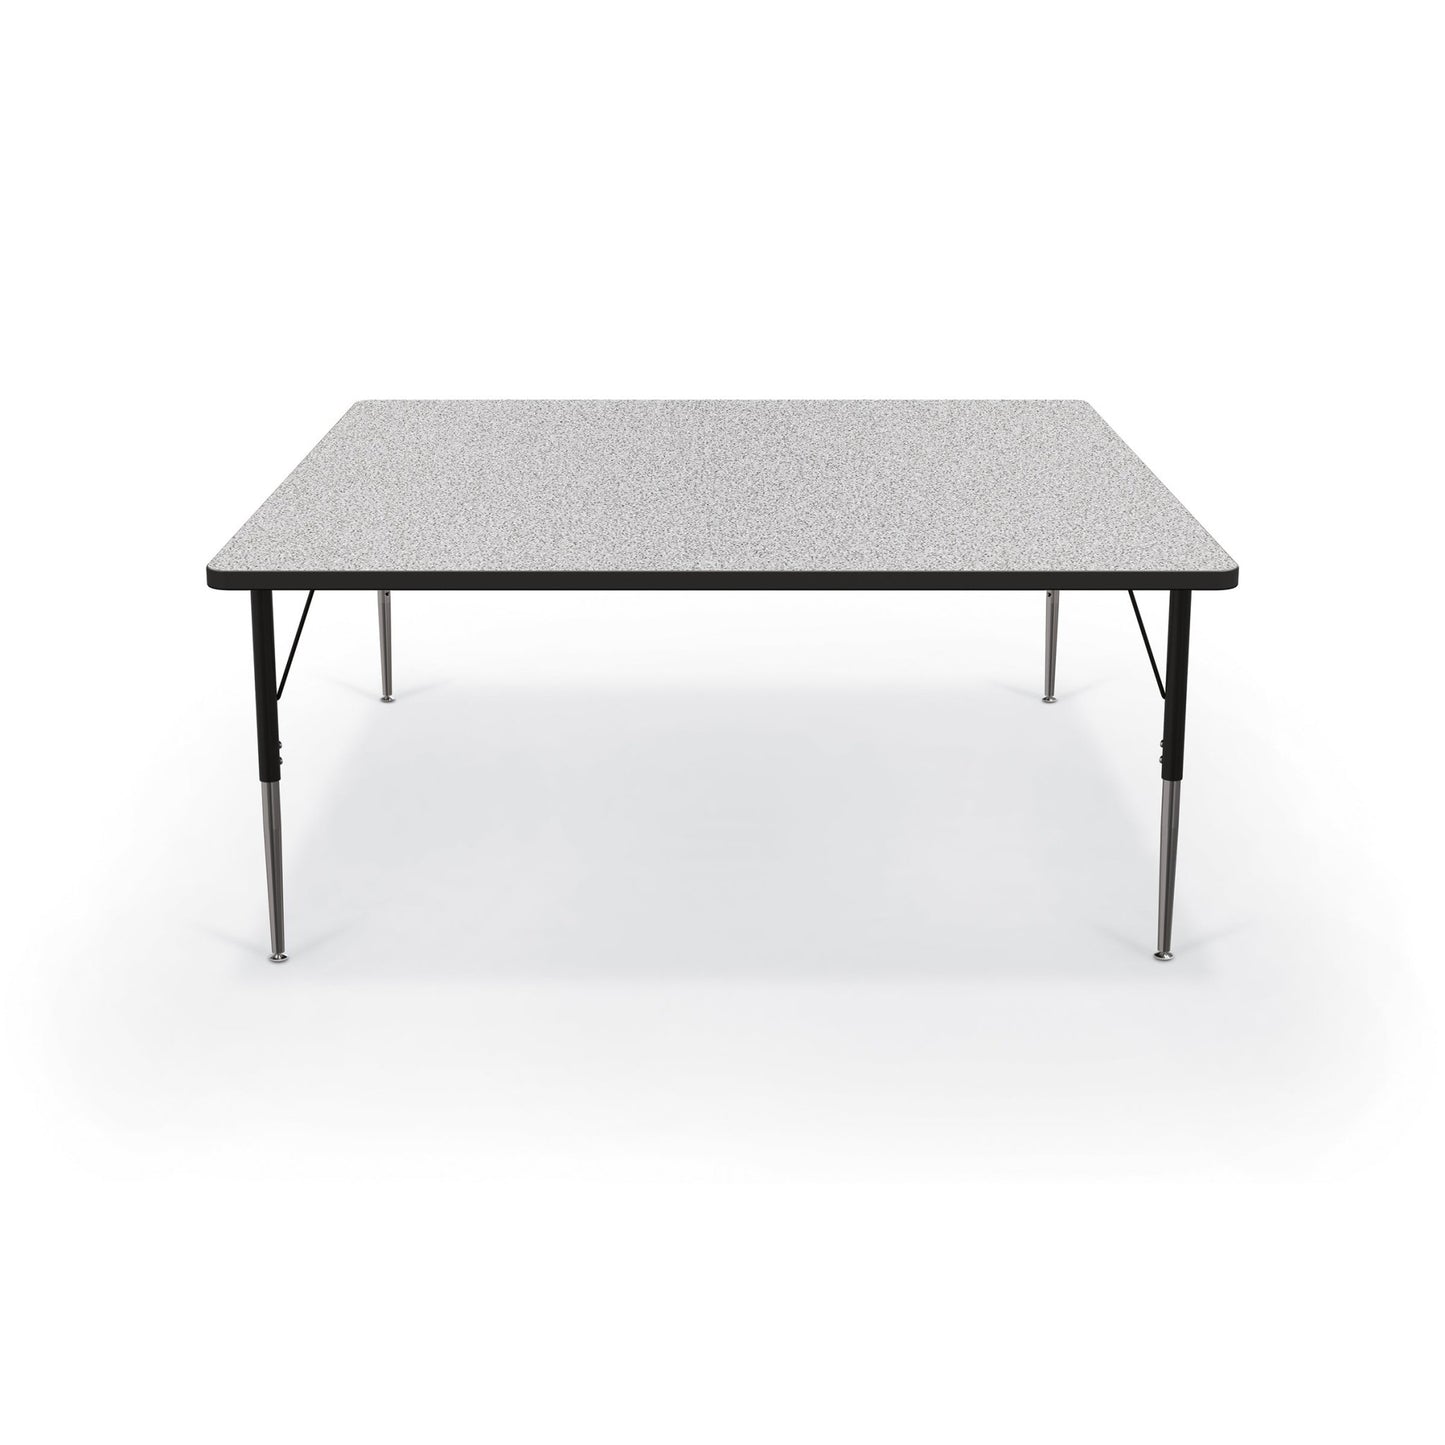 Mooreco Activity Table - 60"D x 60"W - Square - Black Edgeband (Mooreco 90527-M) - SchoolOutlet